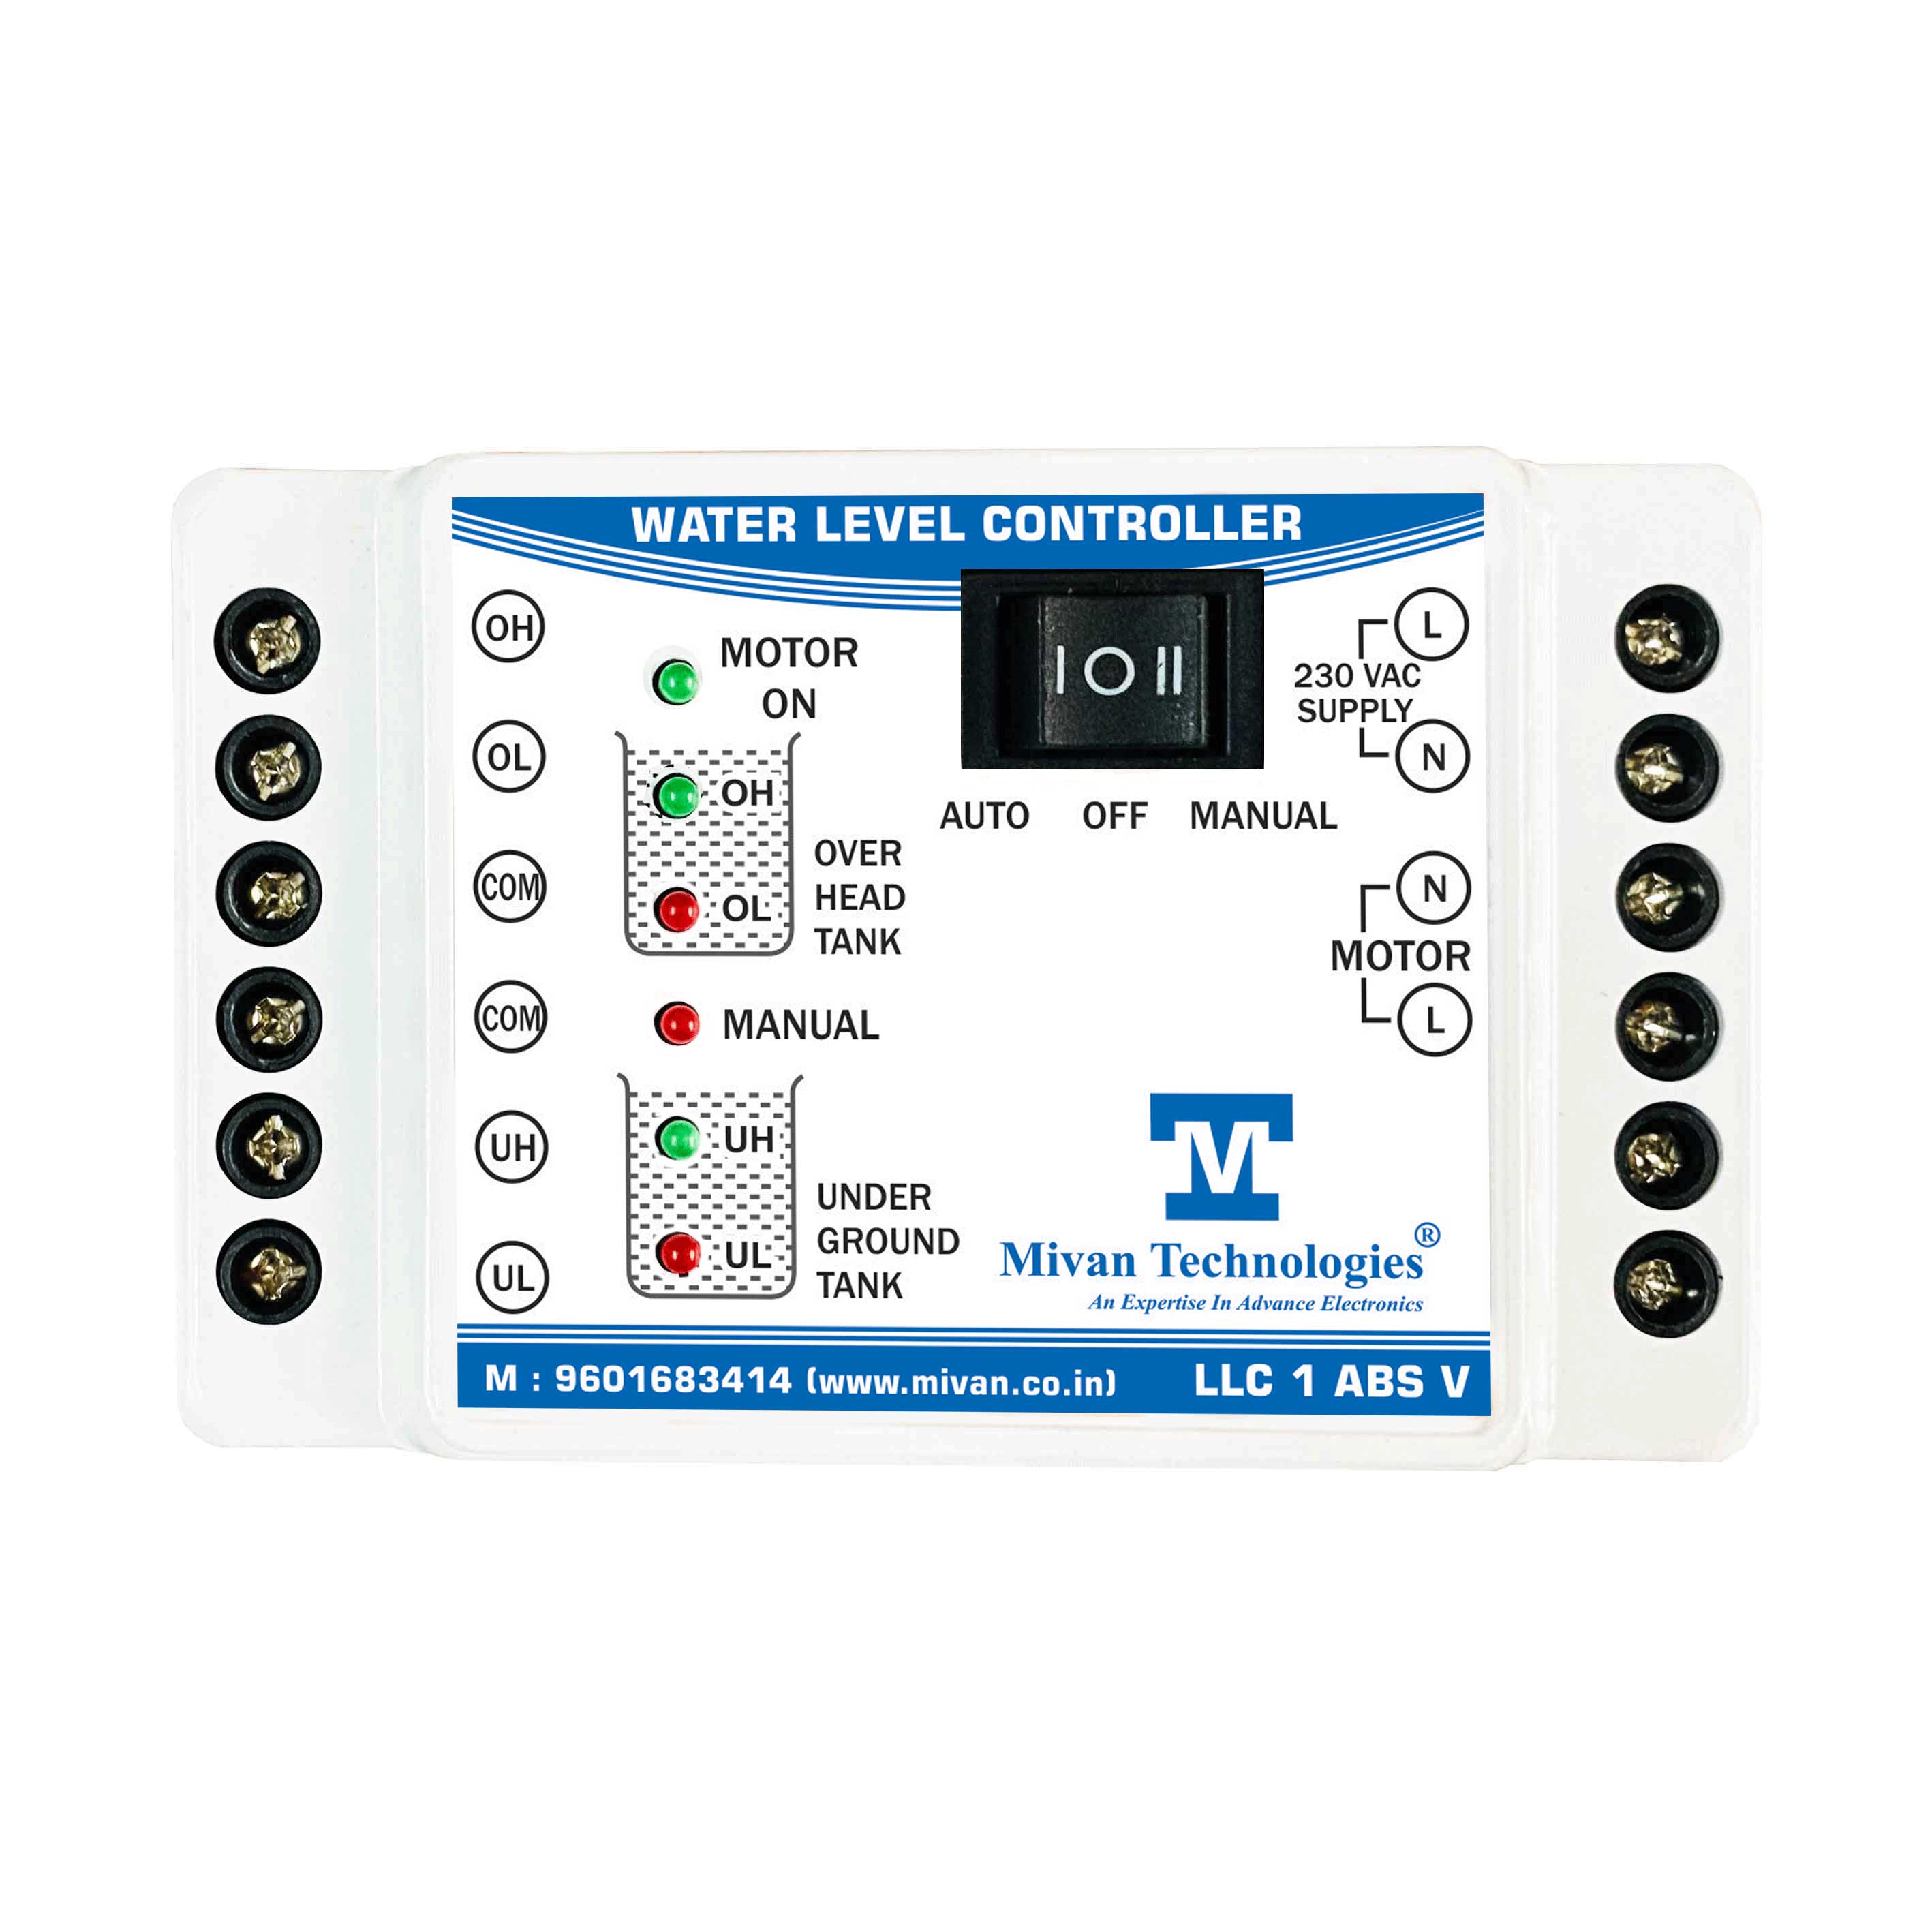 LLC 1 ABS H Fully Automatic Water Level Controller and Indicators For Up and Down Tank With 6 Sensors Suitable For Motor Up to 5Hp Supply 230 VAC